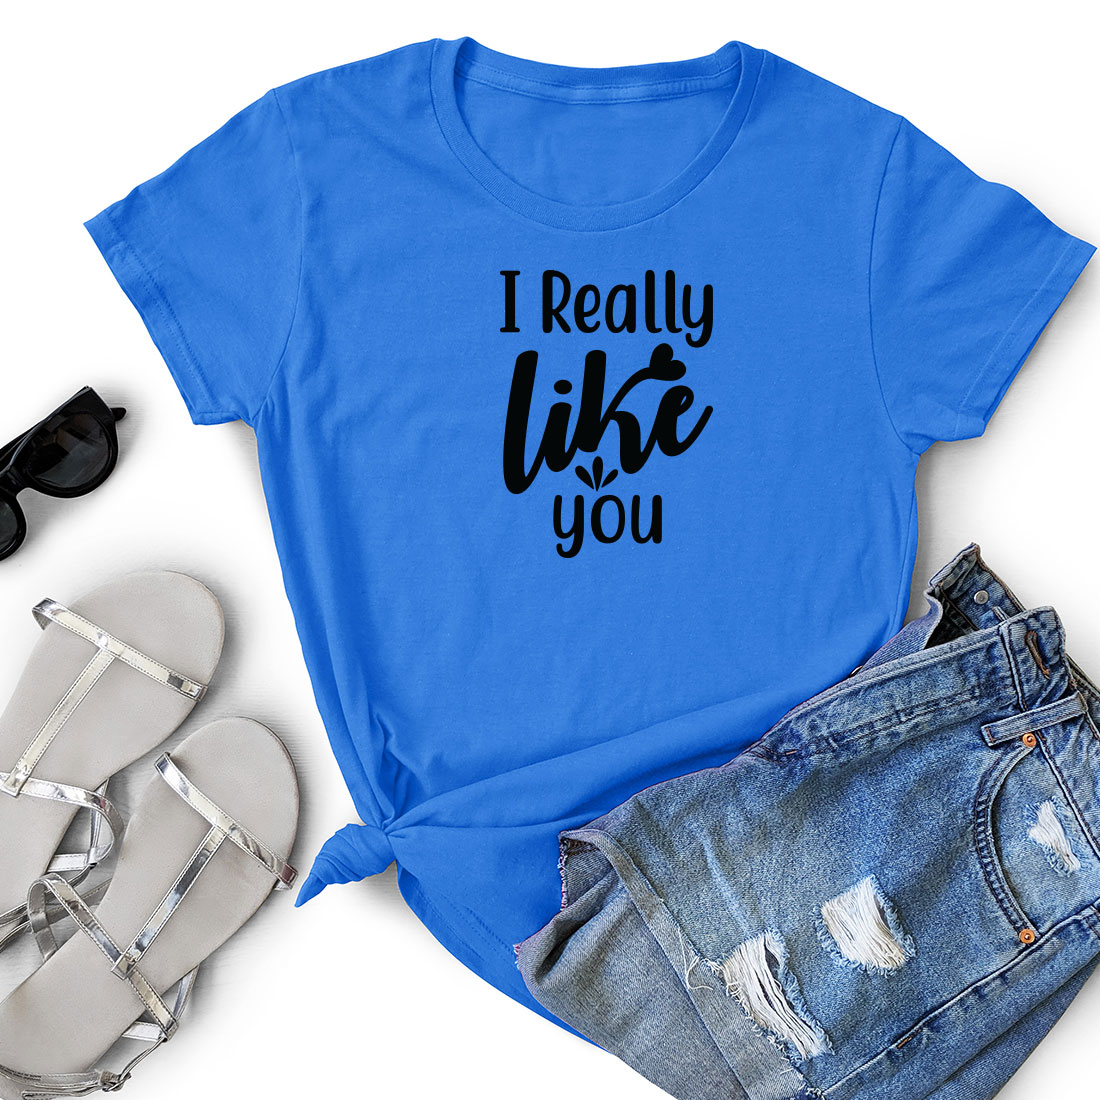 T - shirt that says i really like you next to a pair of shorts.